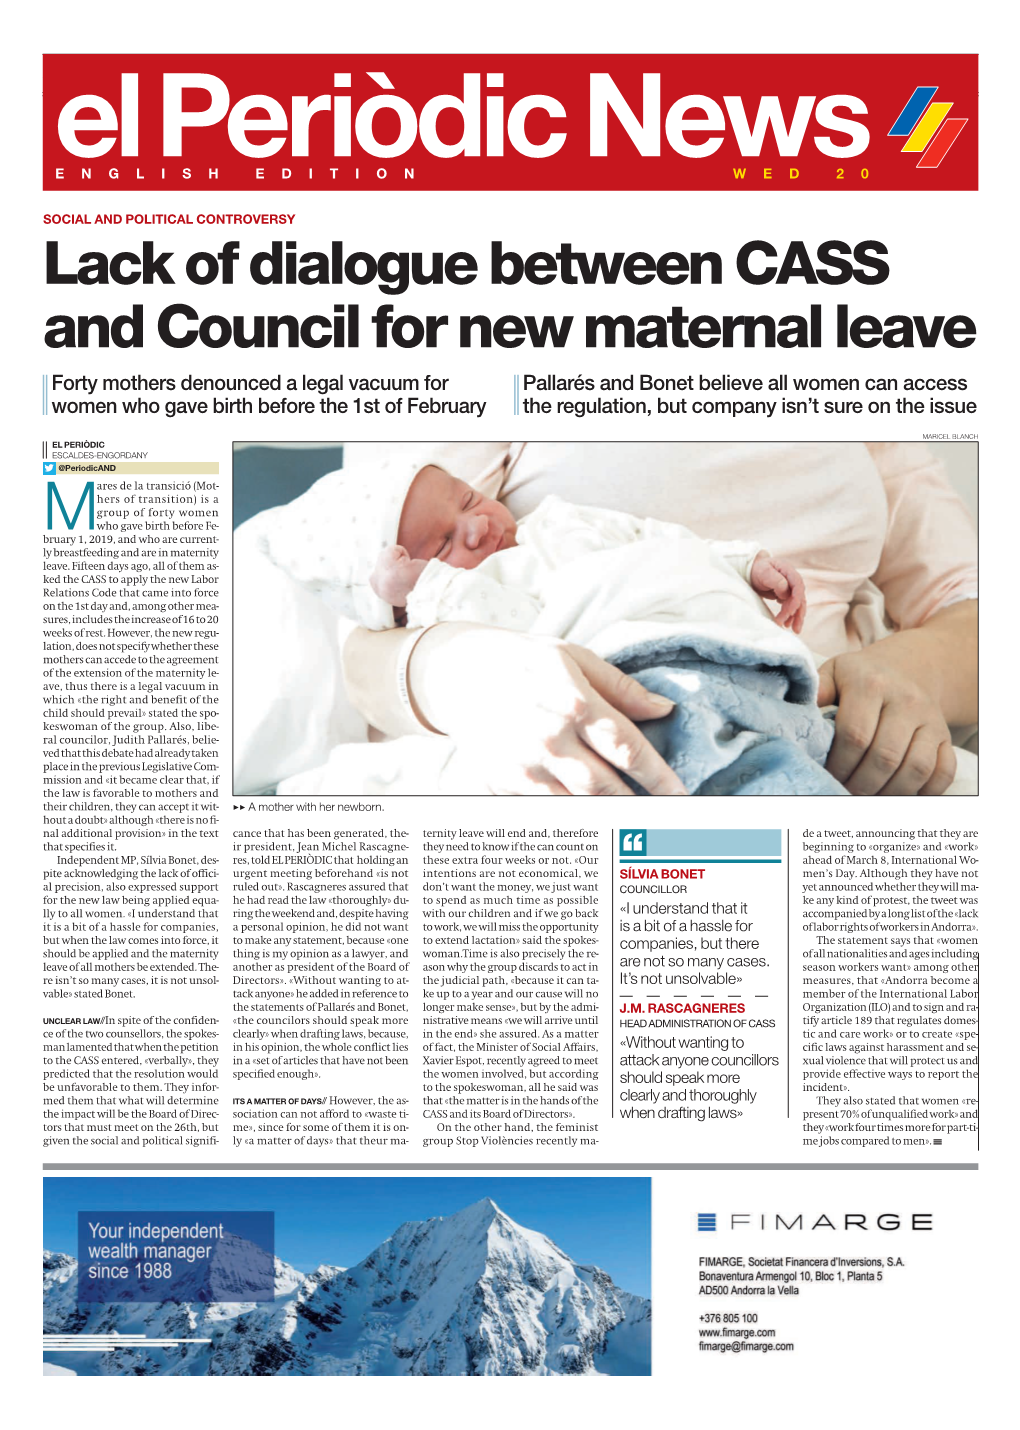 Lack of Dialogue Between CASS and Council for New Maternal Leave